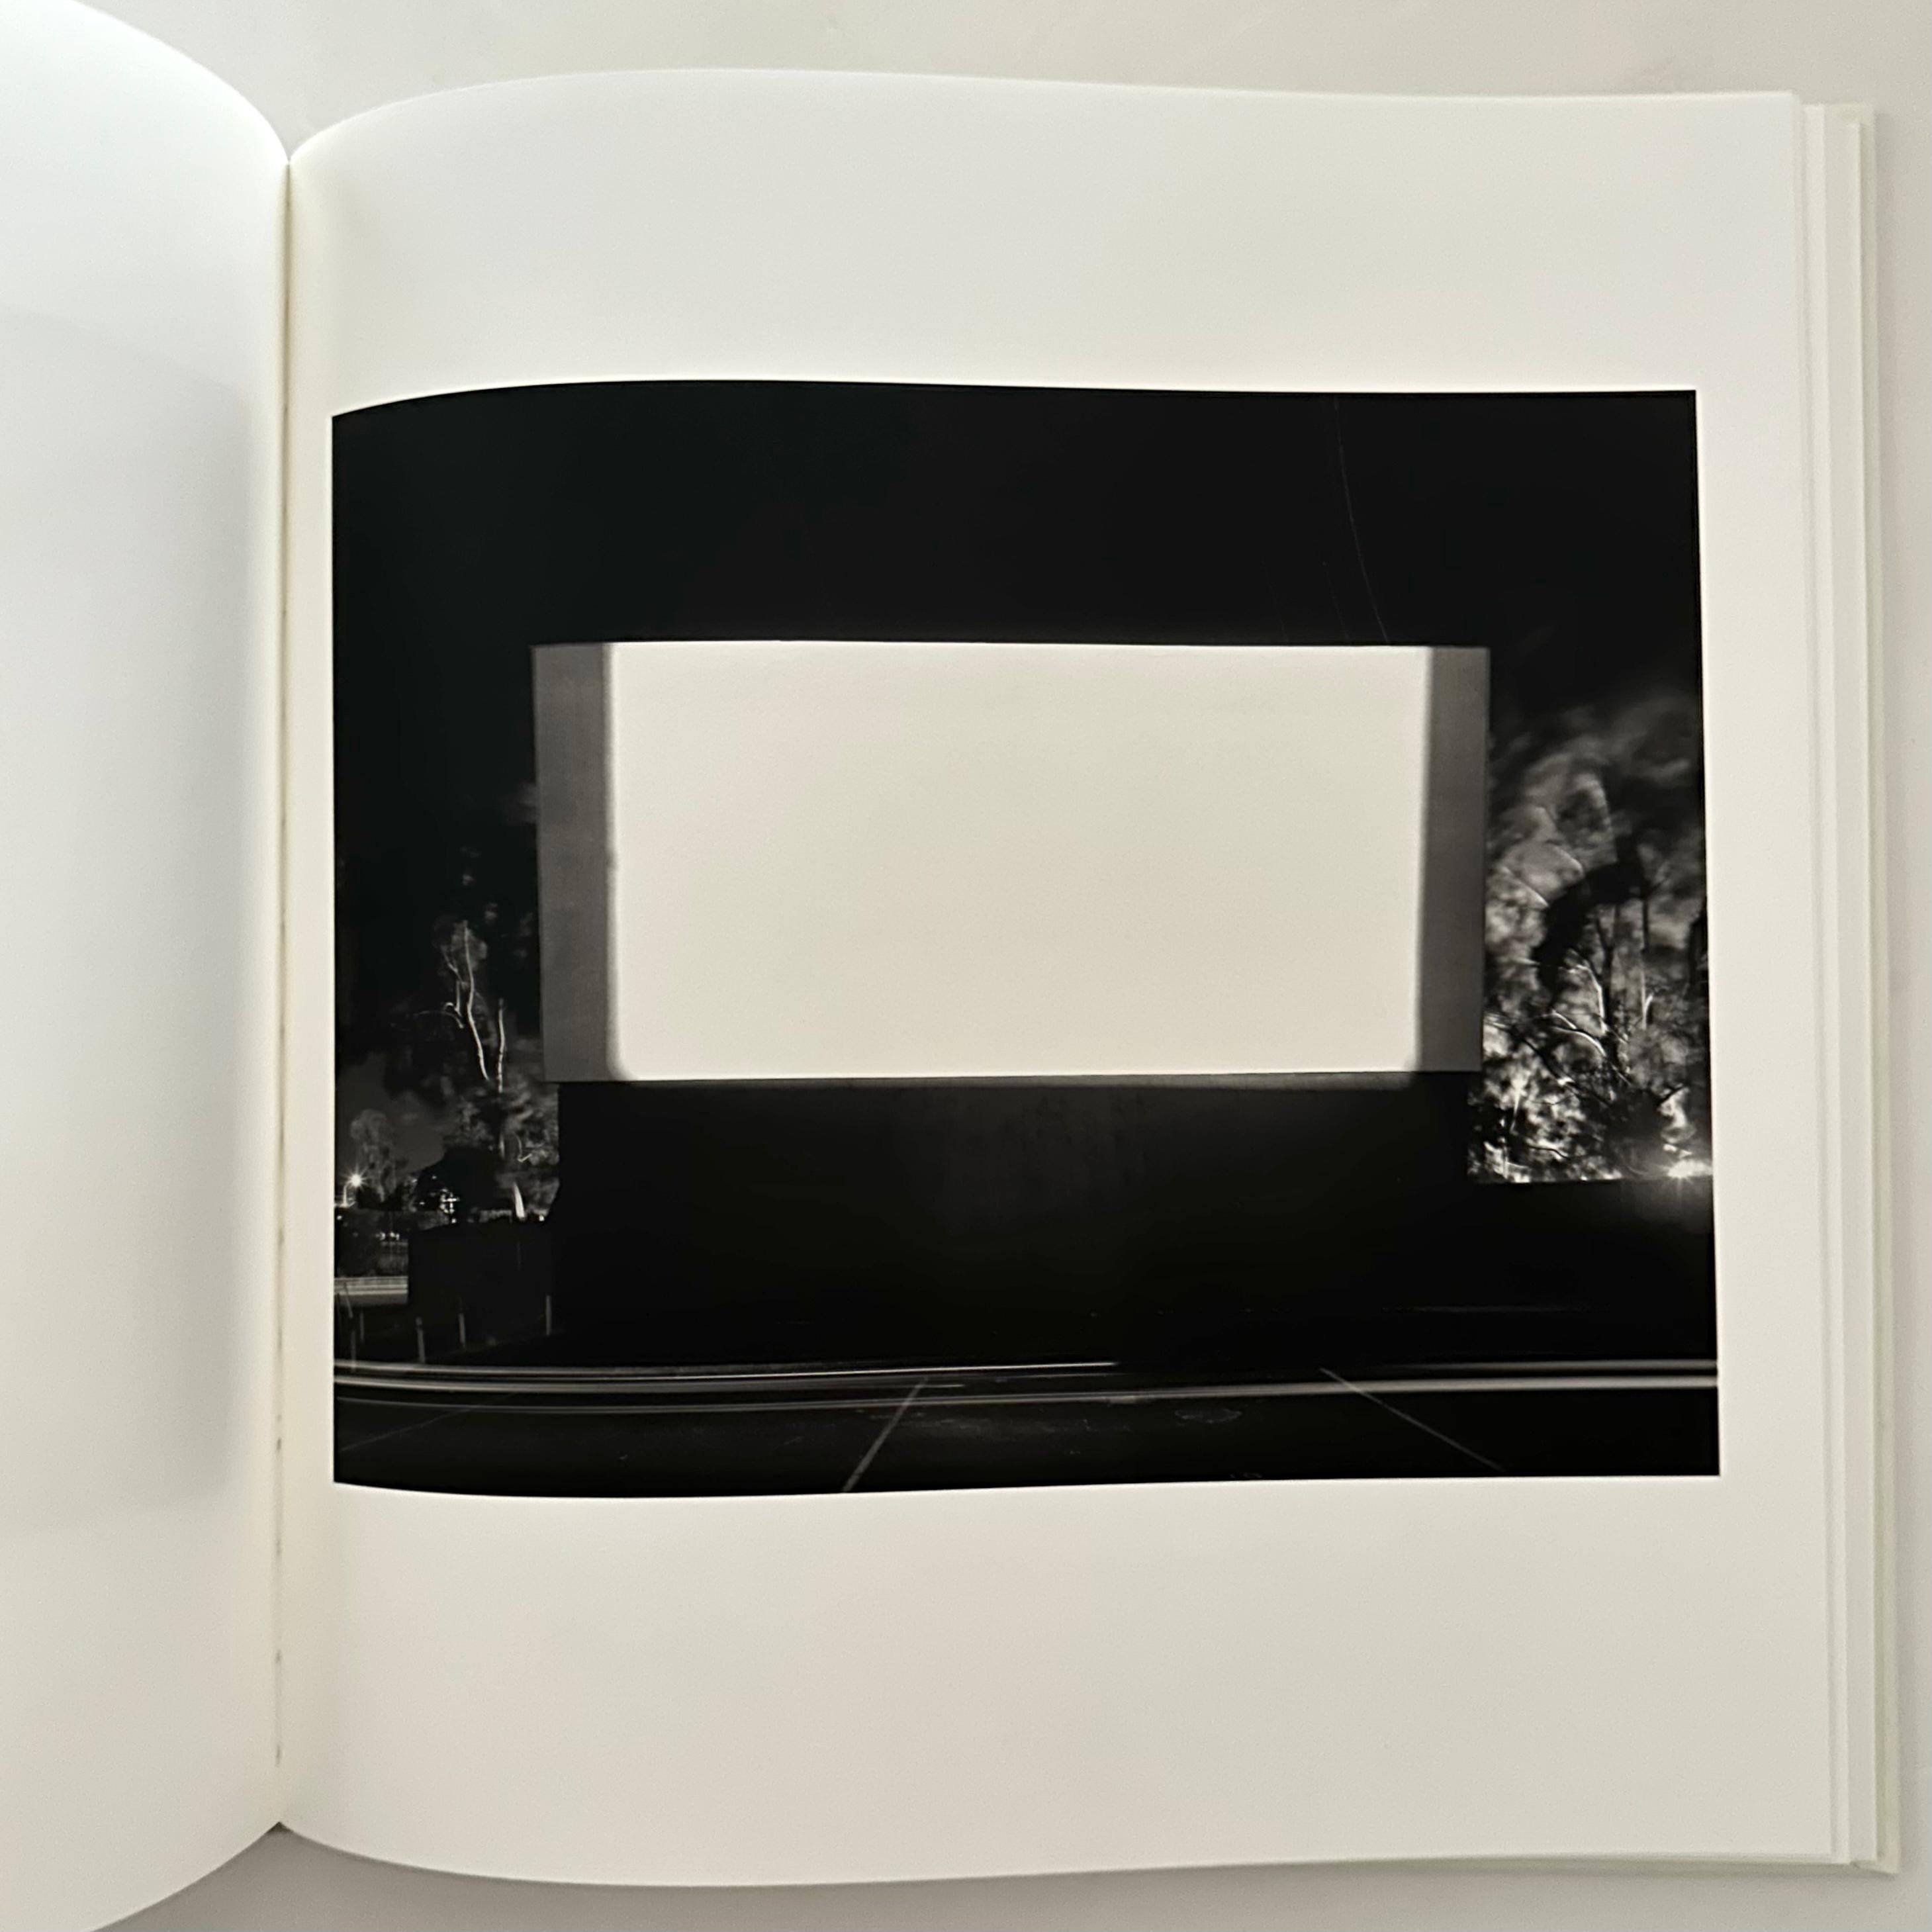 Paper Hiroshi Sugimoto: Theaters - Hans Belting - 1st Edition, New York/ London, 2000 For Sale